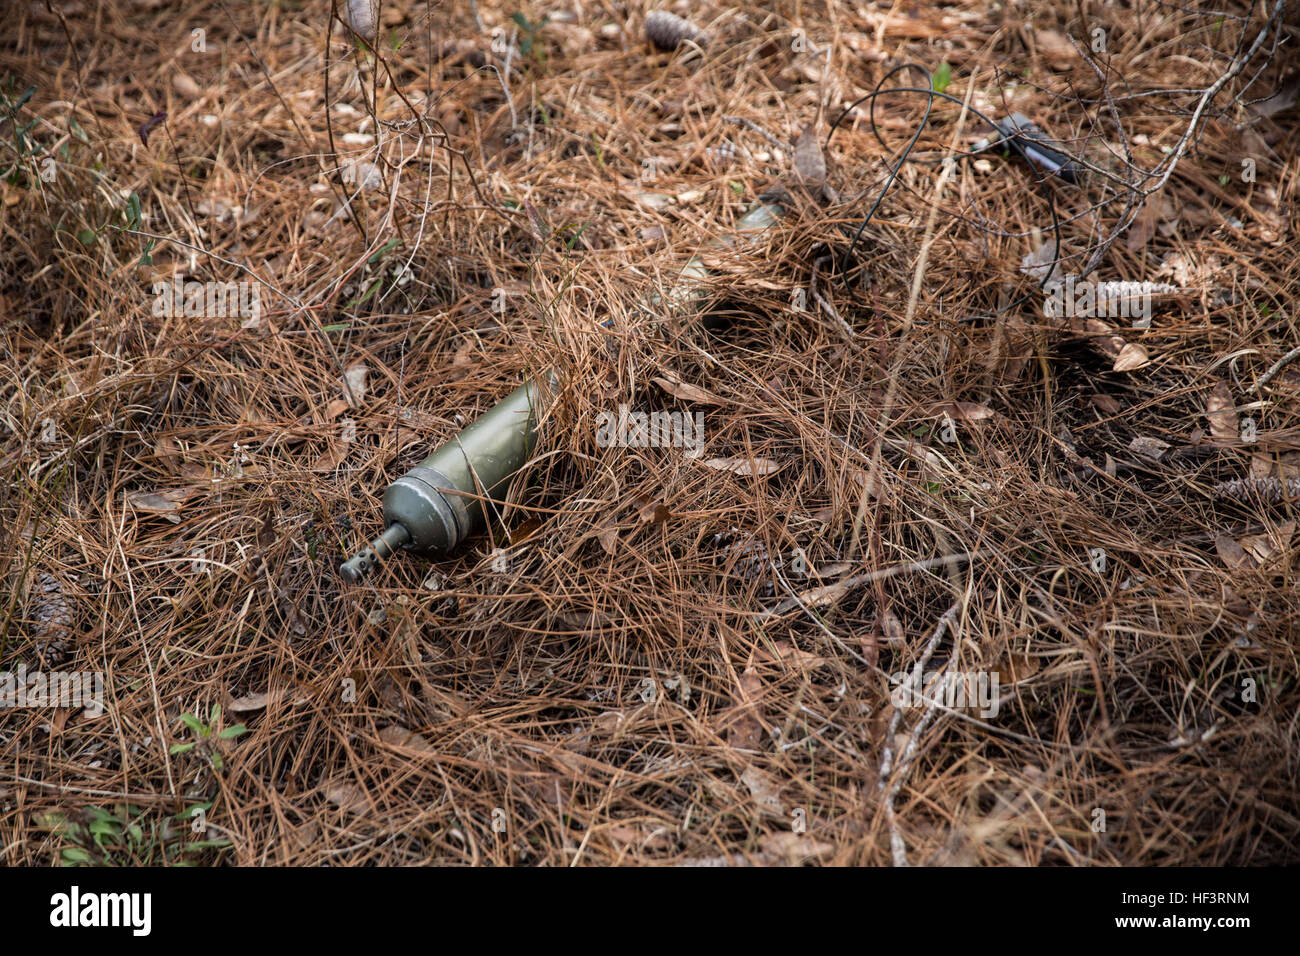 An improvised explosive device (IED) is hidden in the brush during IED training on Marine Corps Outlying Field Atlantic, N.C., Feb. 15, 2016. 2d Low Altitude Air Defense Battalion, Marine Medium Tiltrotor Squadron 264 (reinforced), conducted the training in preparation for deployment with the 22nd Marine Expeditionary Unit. (U.S. Marine Corps photo by Cpl. Jodson B. Graves/Released) 2D LAAD Pre-Deployment Training 160217-M-SW506-193 Stock Photo